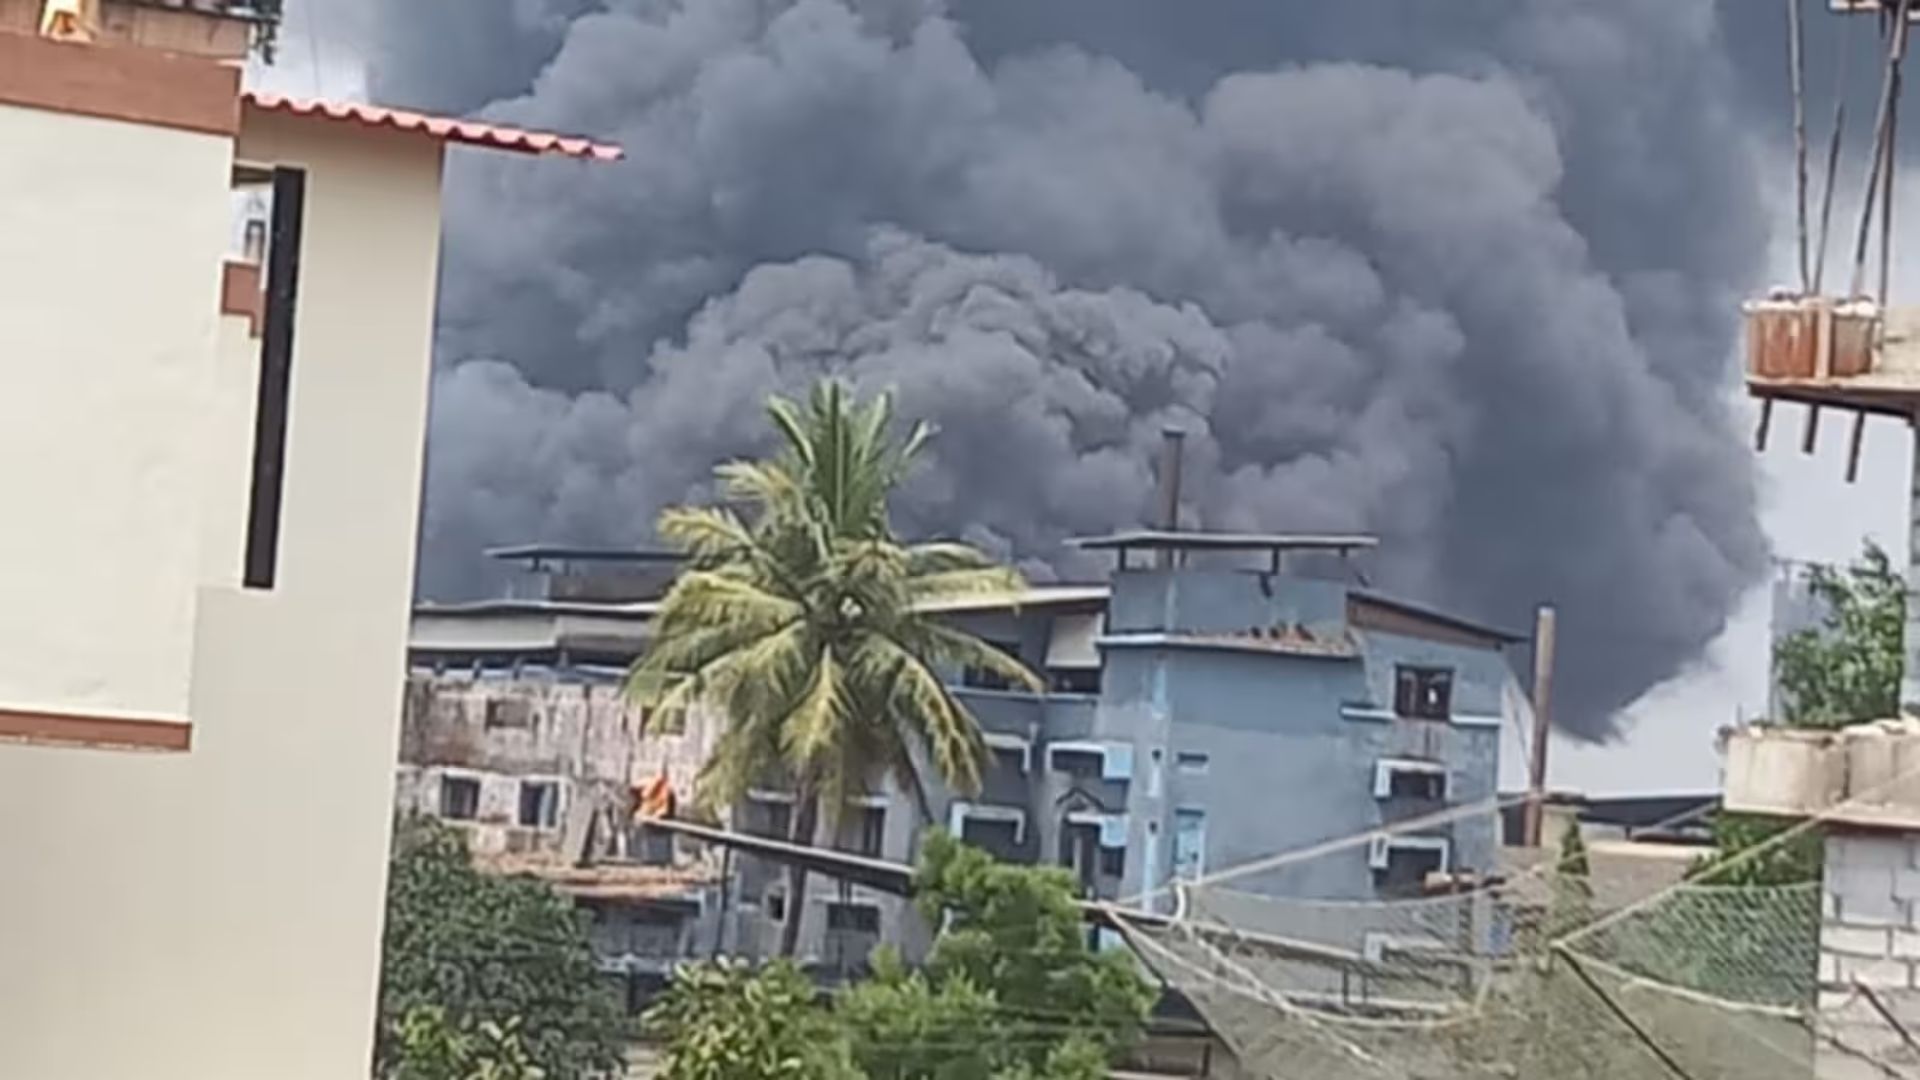 Maharashtra: Massive Fire In Dombivli Industrial Area After Boiler Blast In Chemical Plant